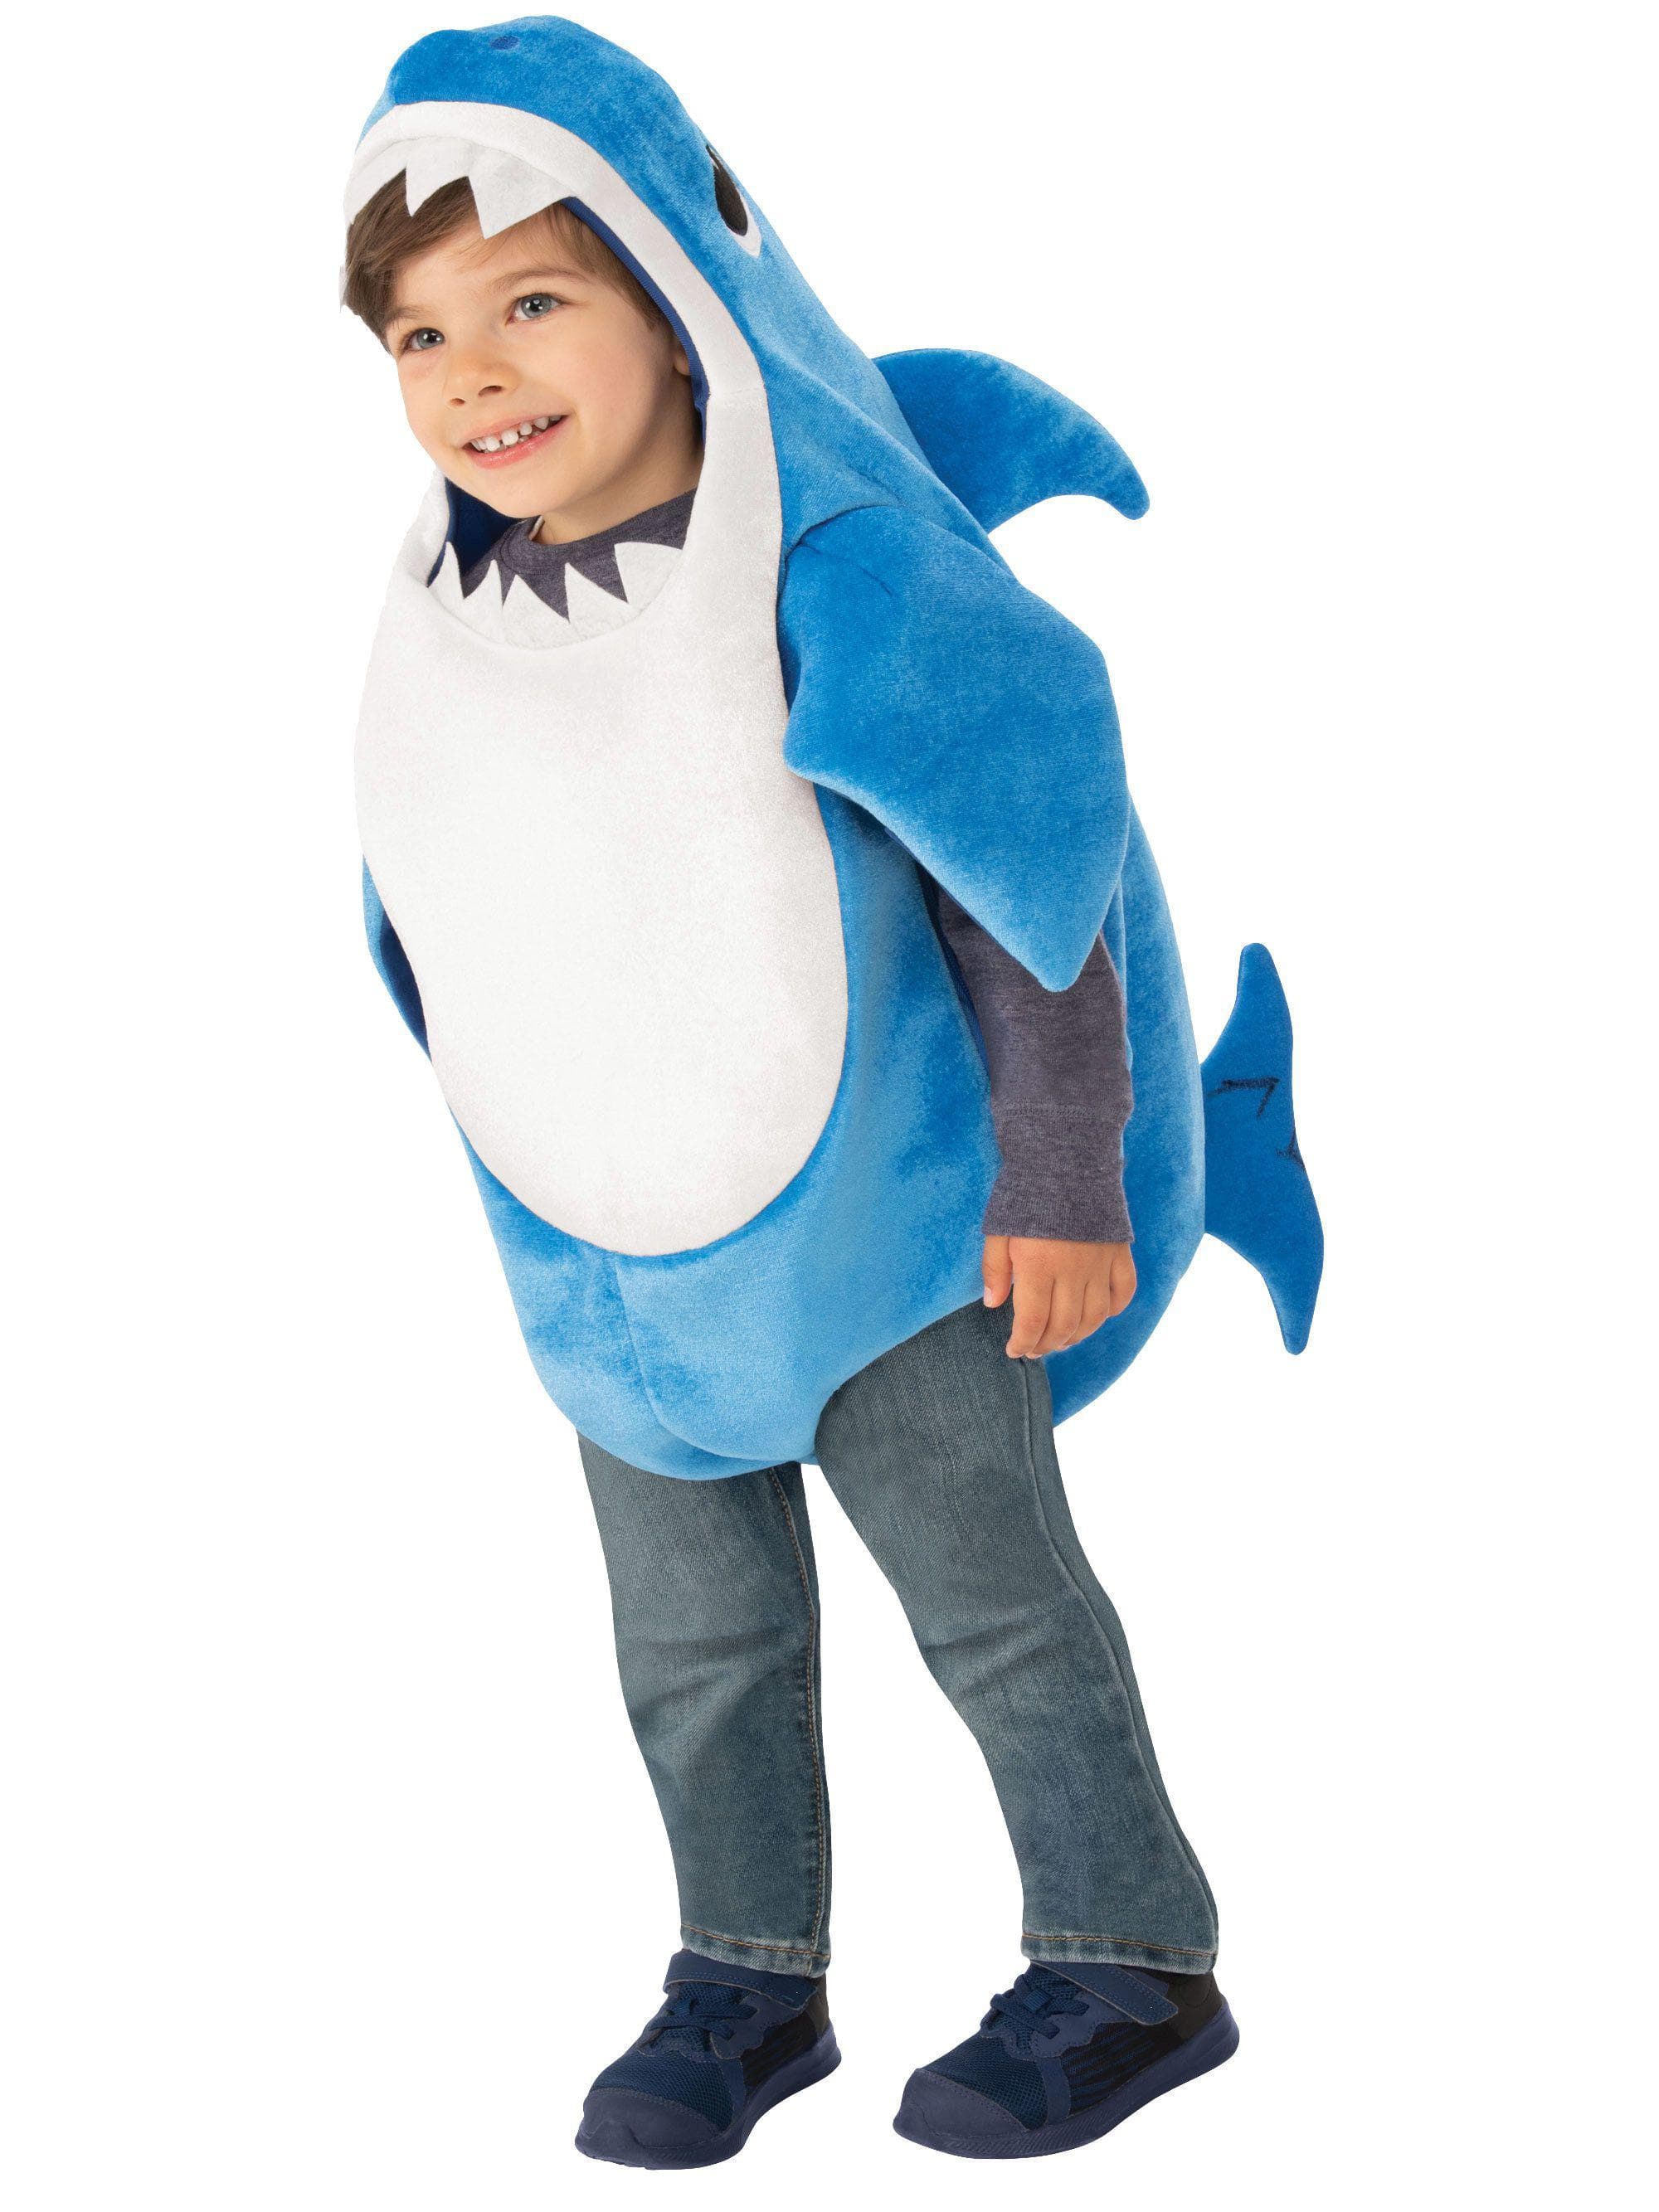 Baby Shark Daddy Shark Costume for Babies and Toddlers - costumes.com